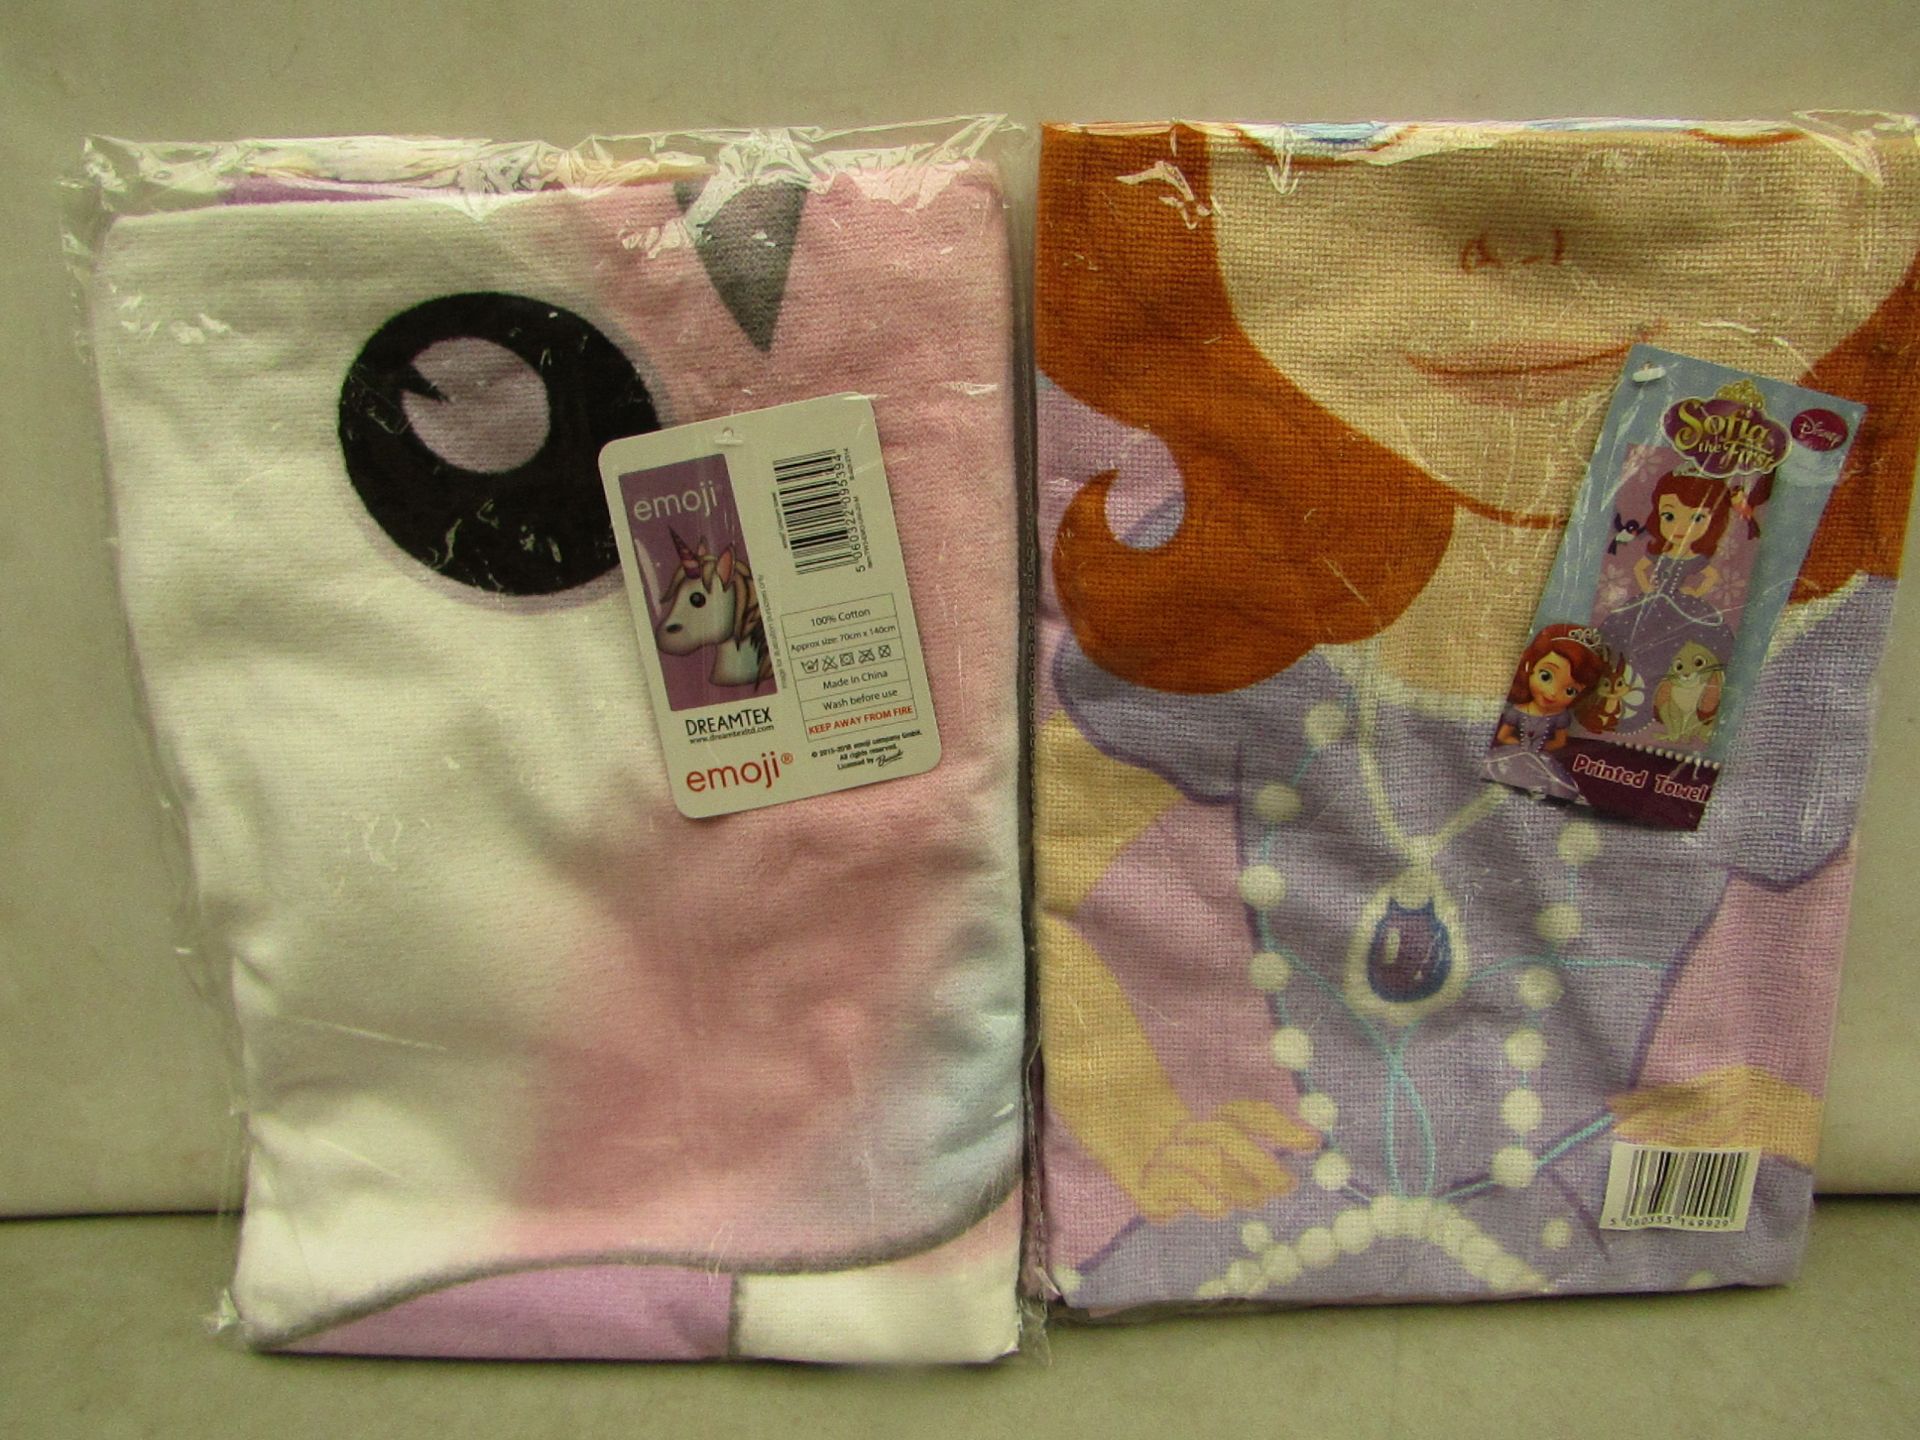 2 x Printed Towels. 1 Being an Emoji Towel & a Sofia the First Towel. New & Packaged